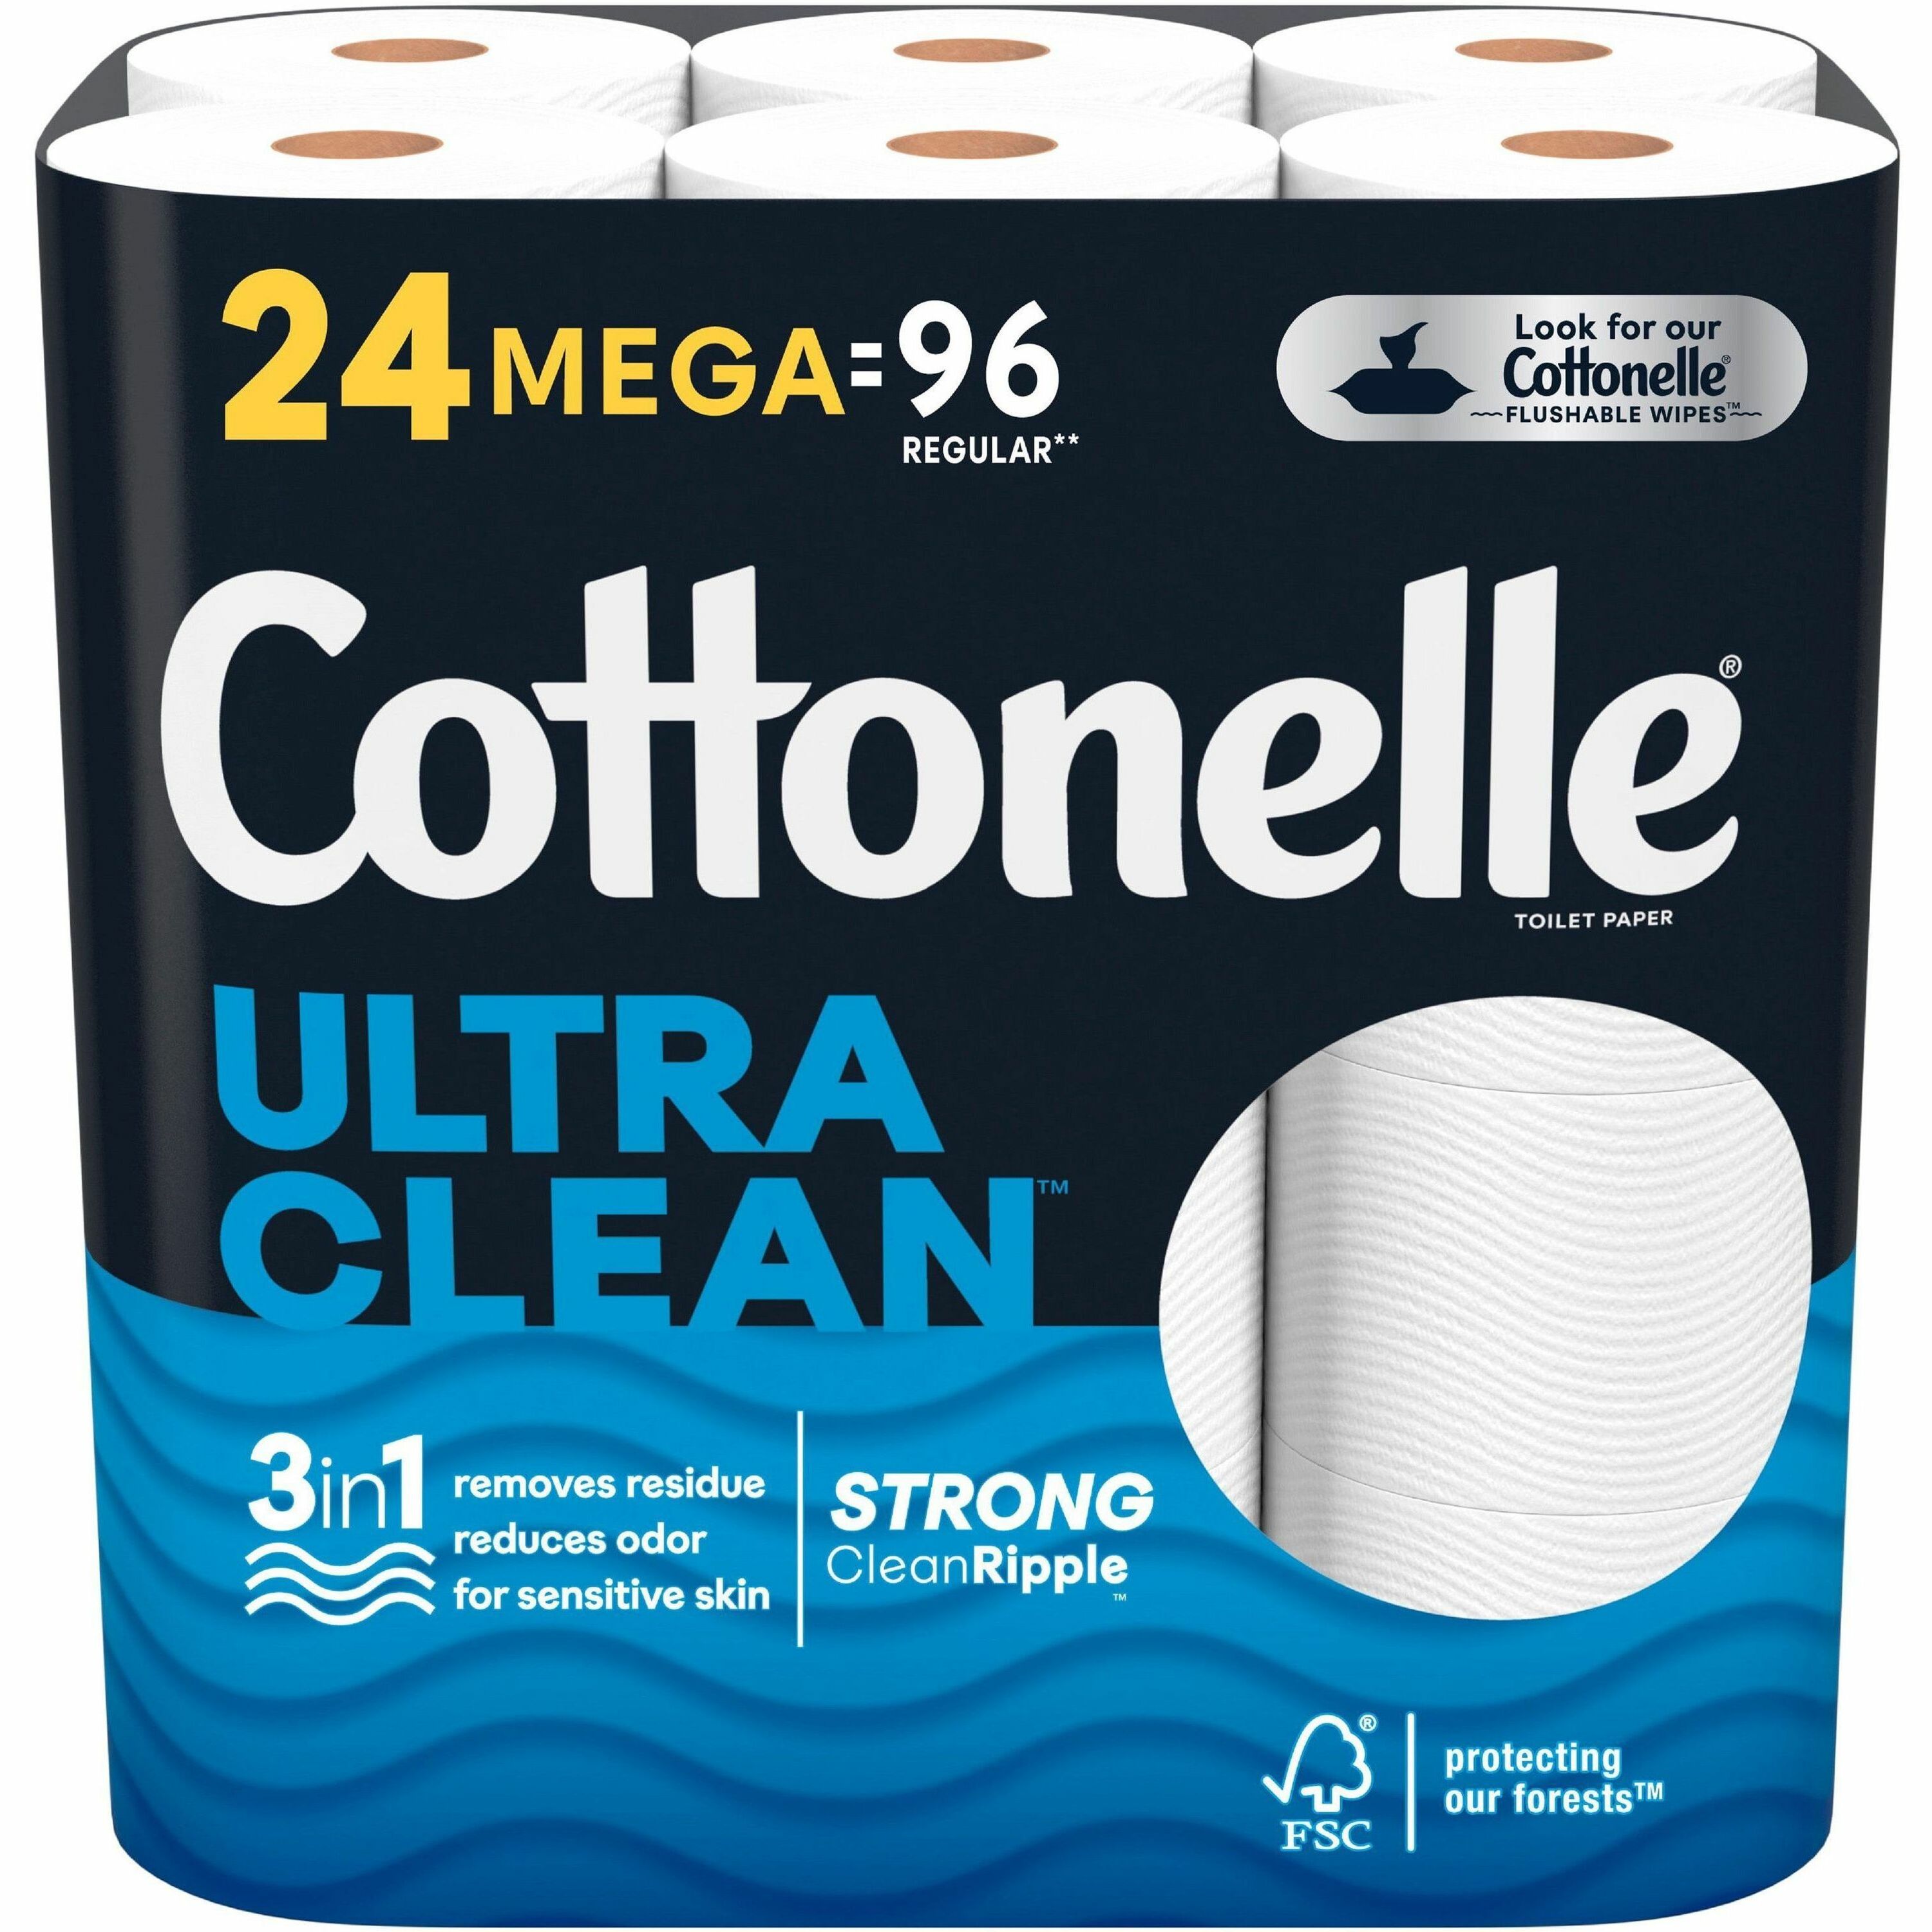 cottonelle-ultra-clean-toilet-paper-1-ply-312-sheets-roll-white-fiber-flushable-clog-safe-sewer-safe-septic-safe-chemical-free-dye-free-thick-absorbent-fragrance-free-paraben-free-for-toilet-24-pack_kcc54161 - 1